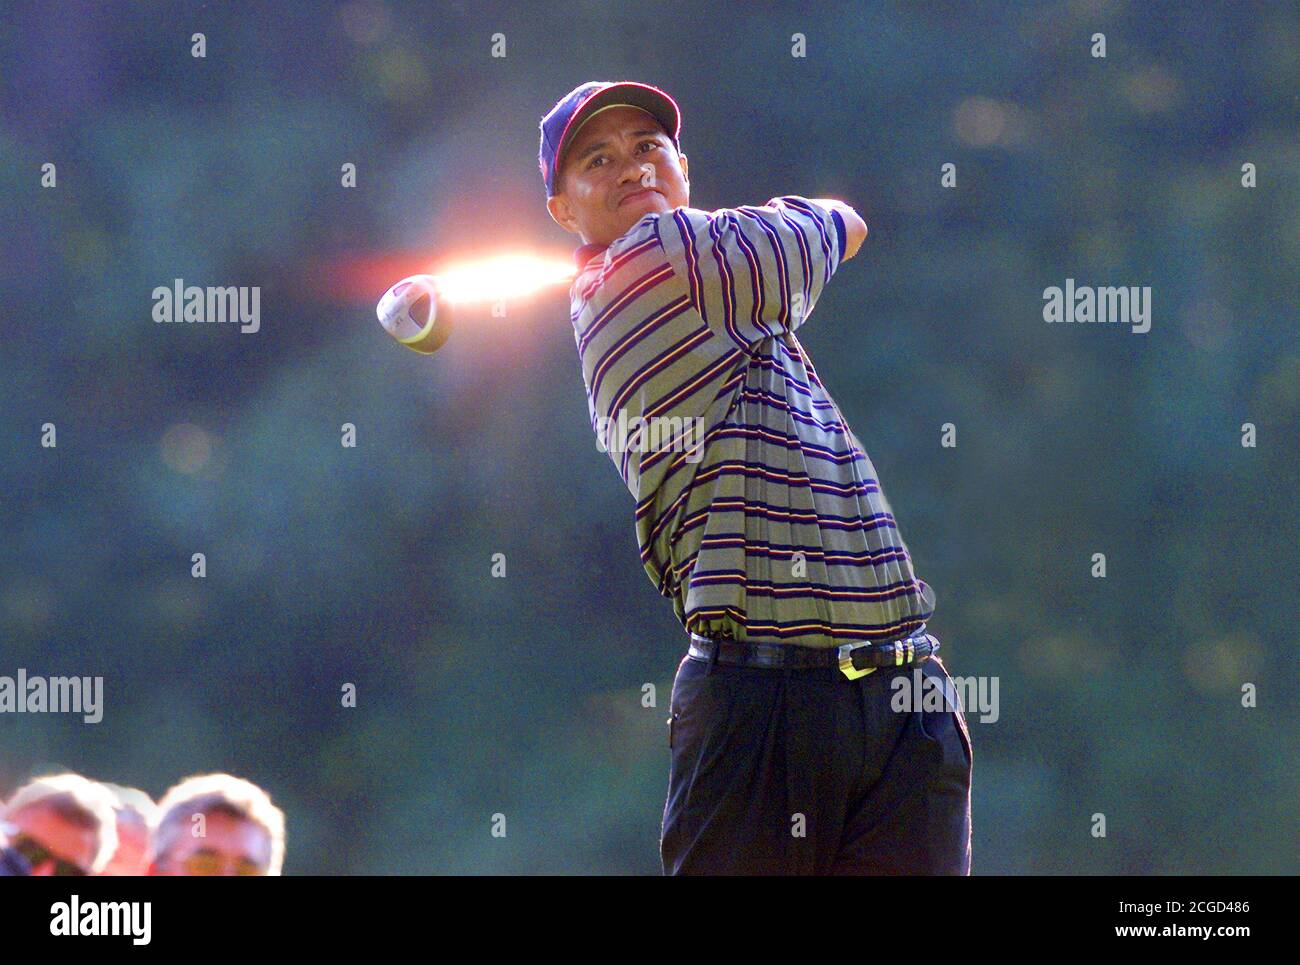 TIGER WOODS DRIVER CATCHES THE EARLY MORNING SUNLIGHT, 1999 RYDER CUP, BROOKLINE COUNTRY CLUB, USA. 24/09/1999  PHOTO CREDIT : © MARK PAIN / ALAMY Stock Photo